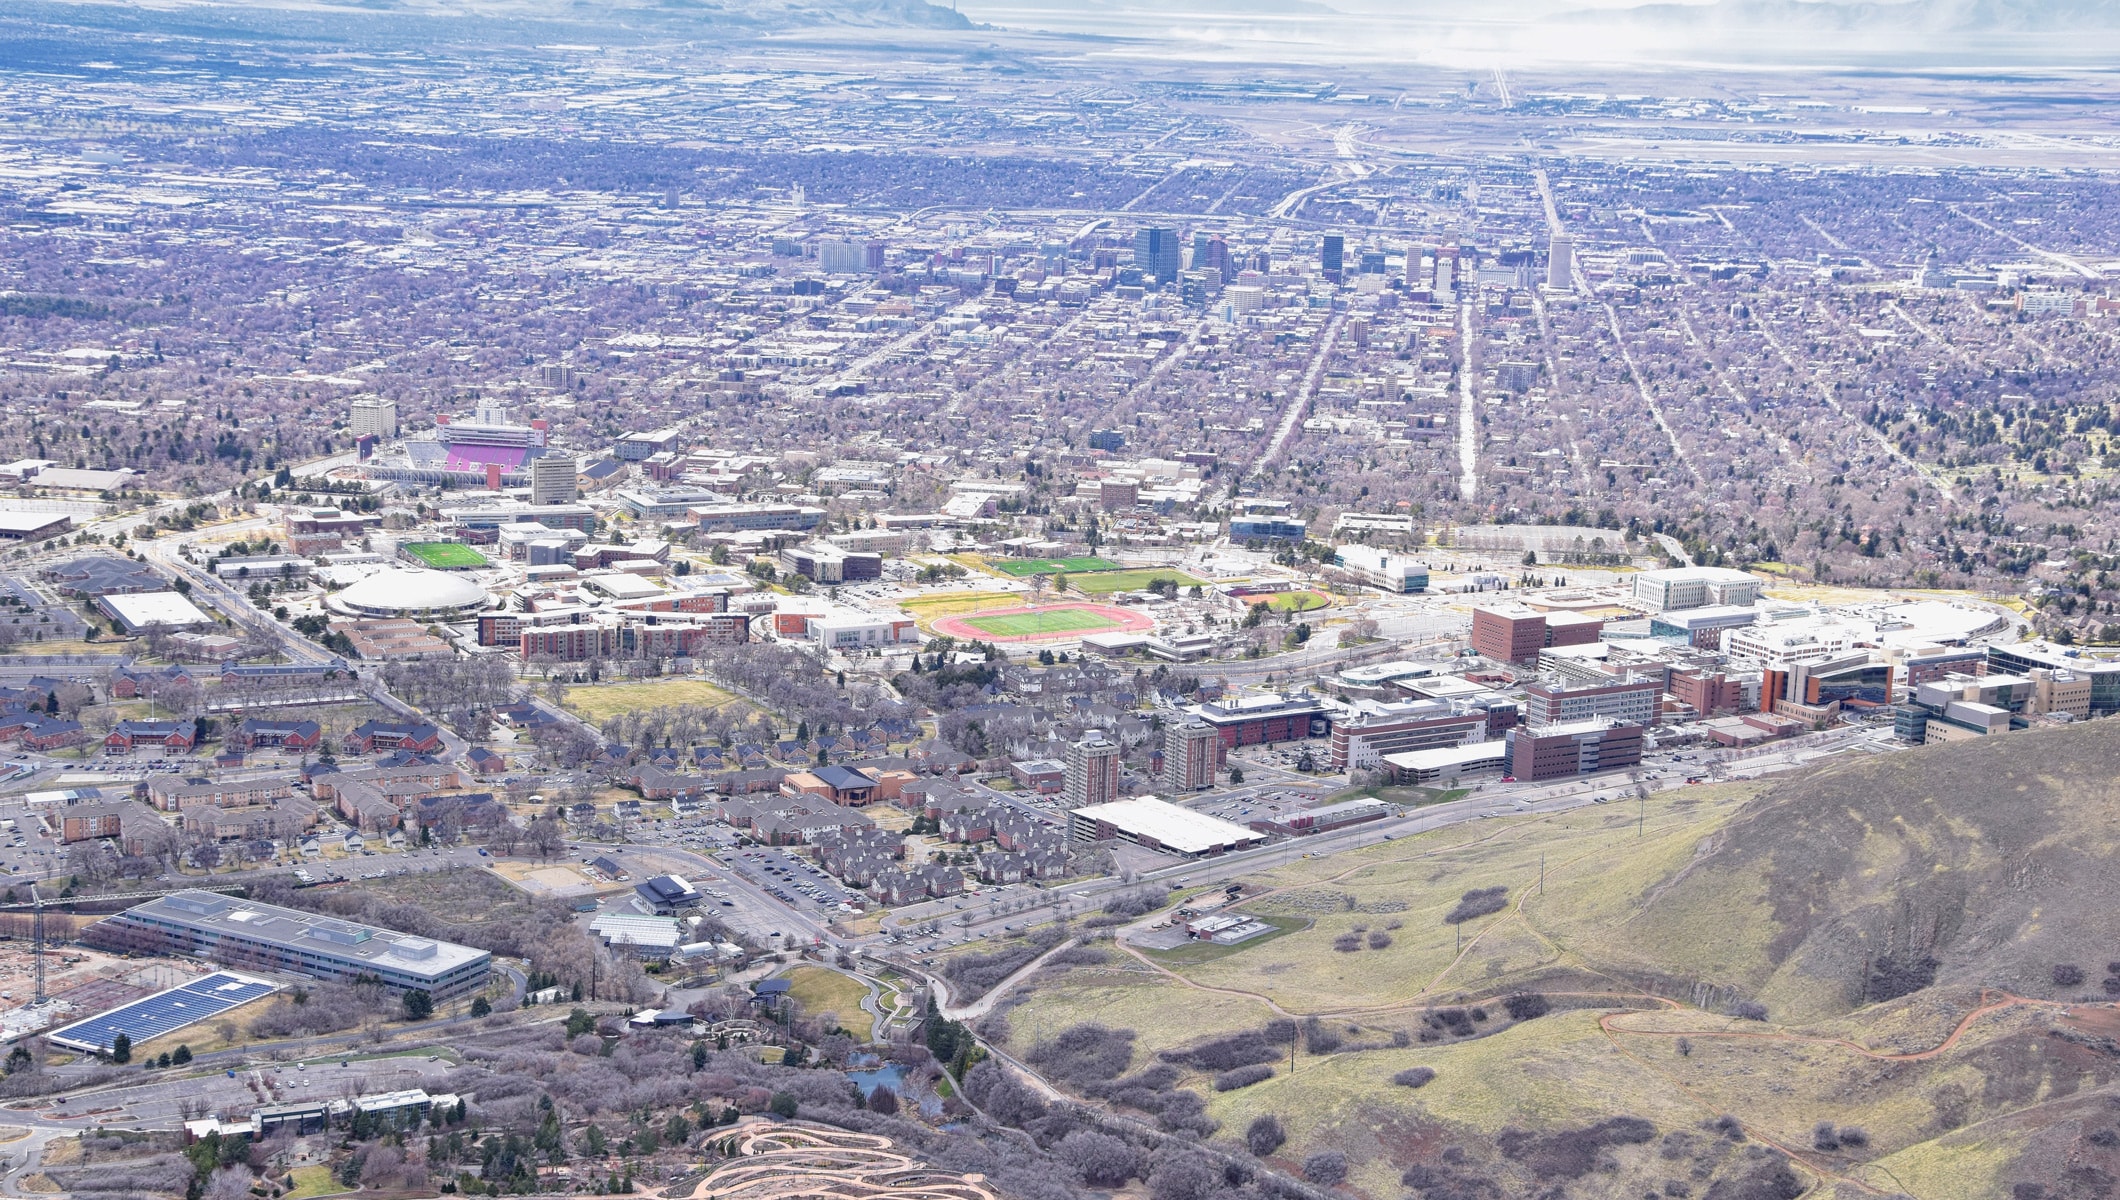 Commission approval brings new development to Salt Lake City